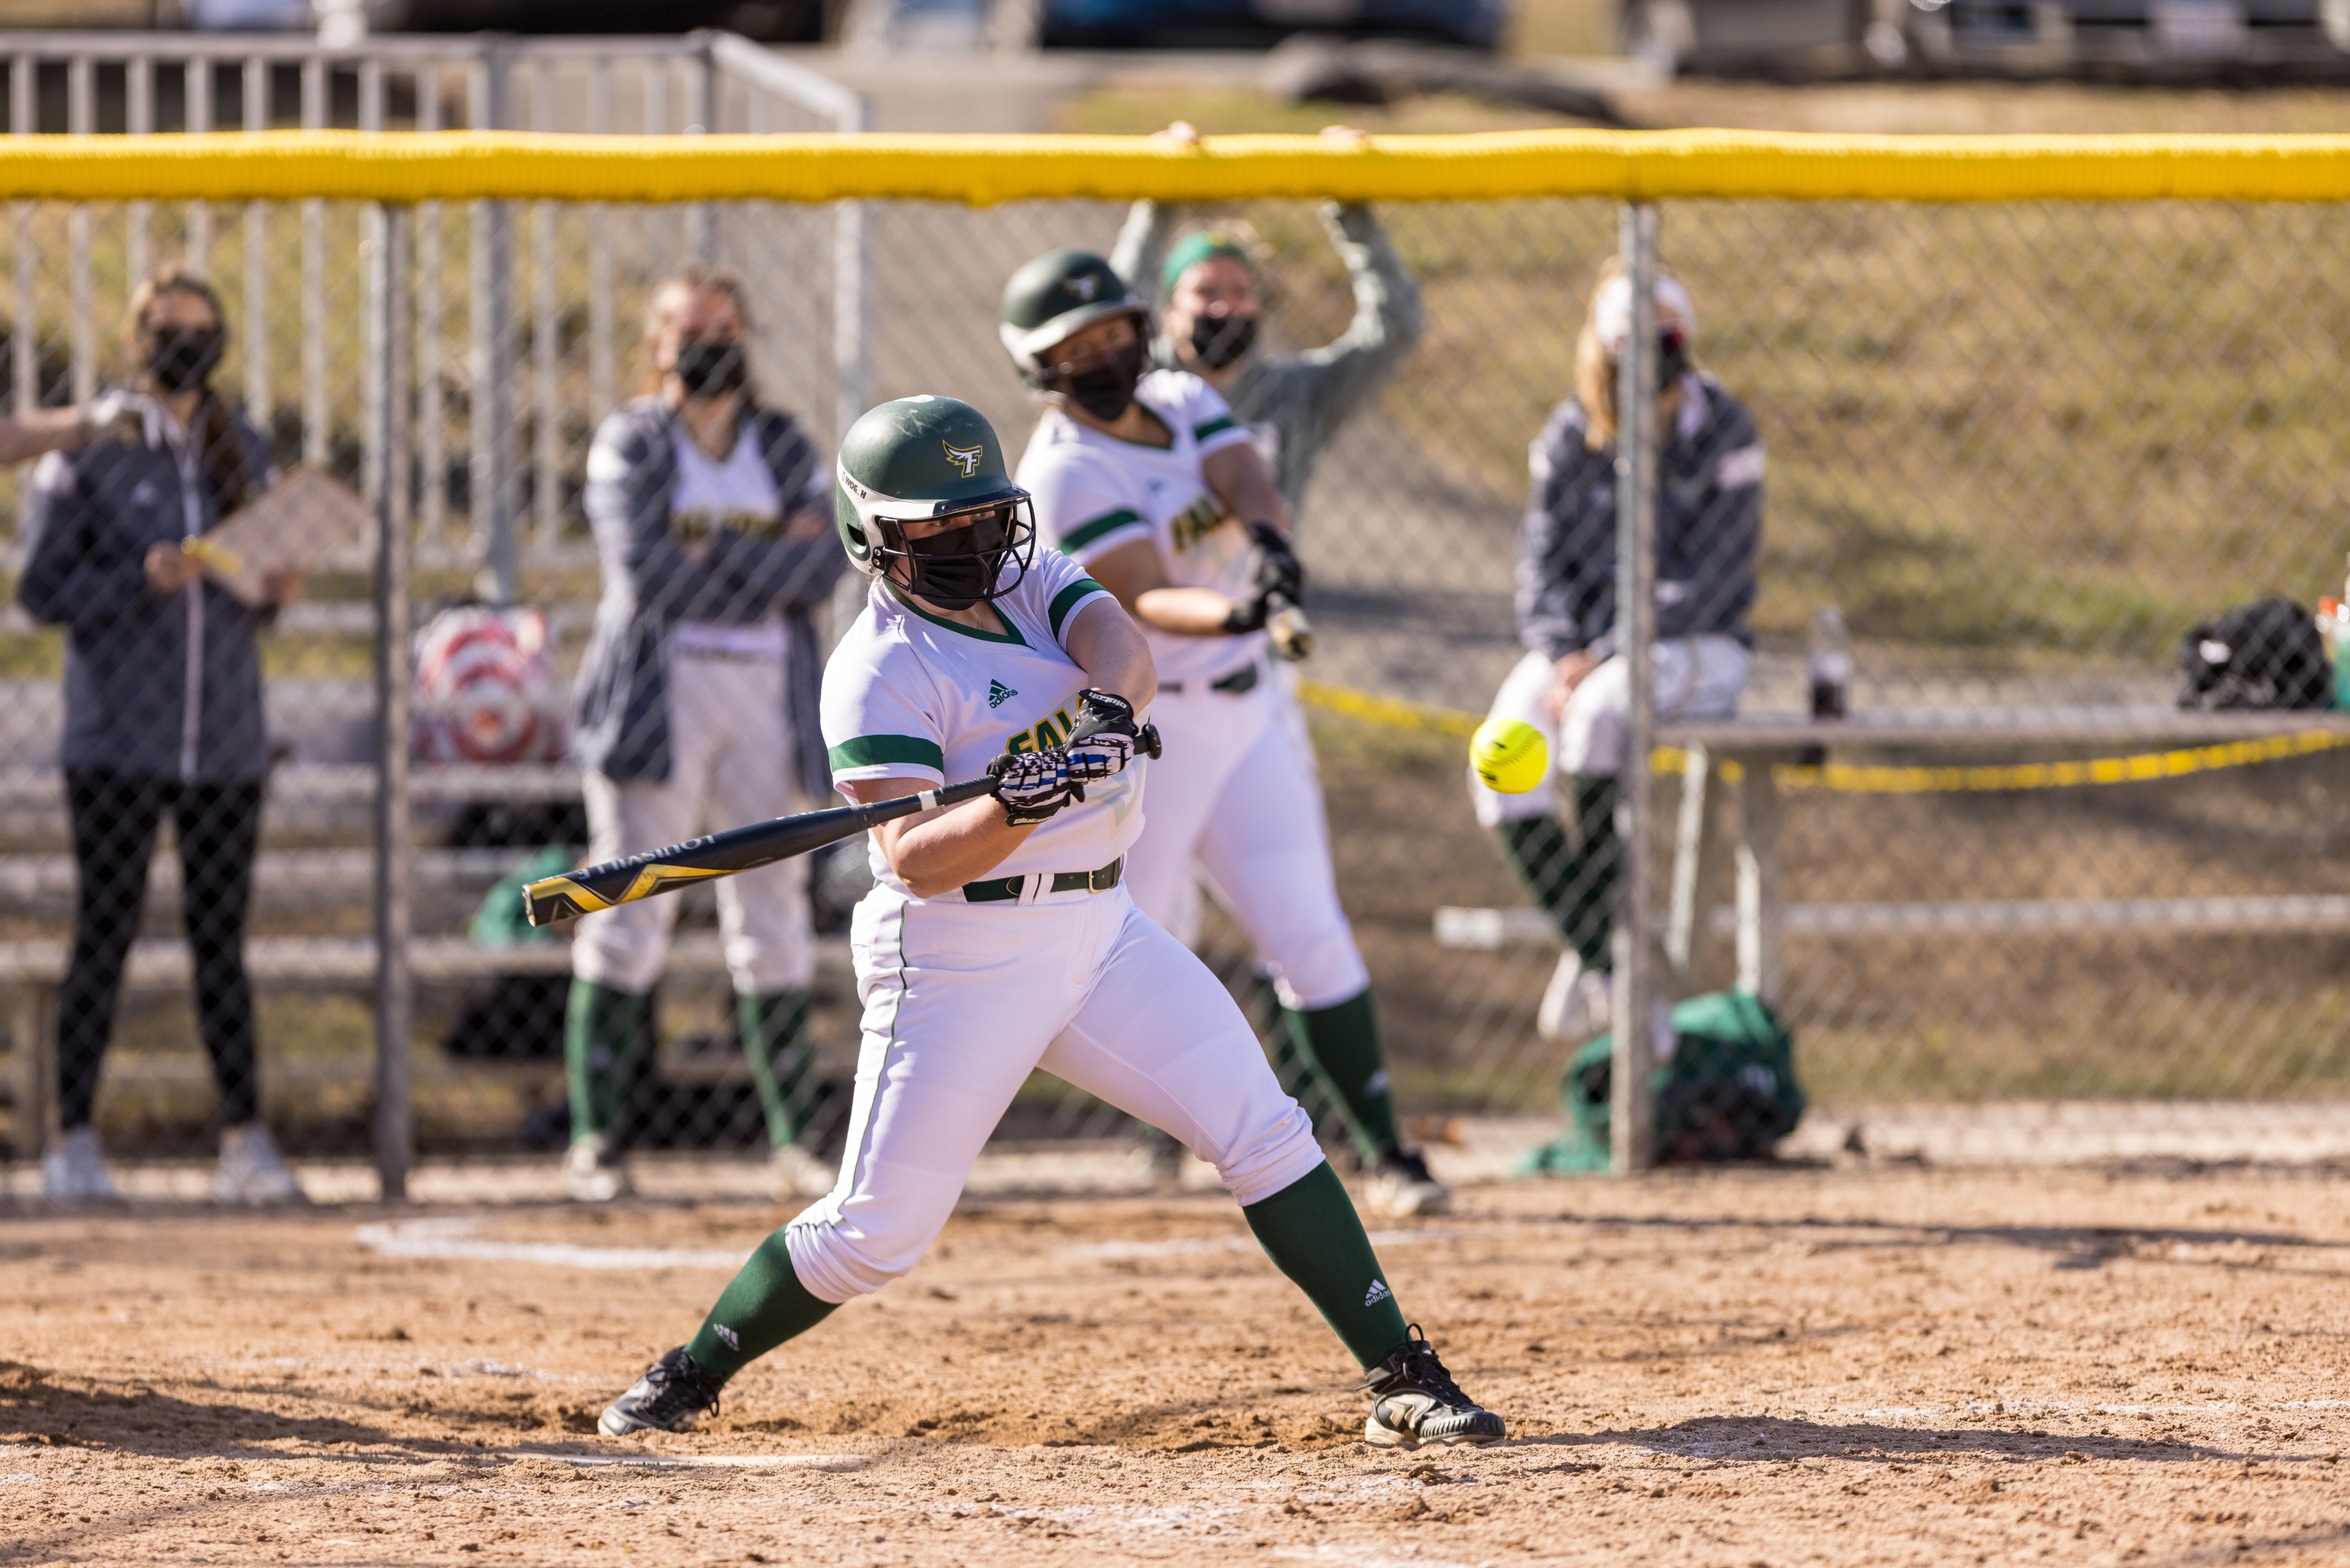 Falcons Split On Final Day Of The Fastpitch Dreams Classic